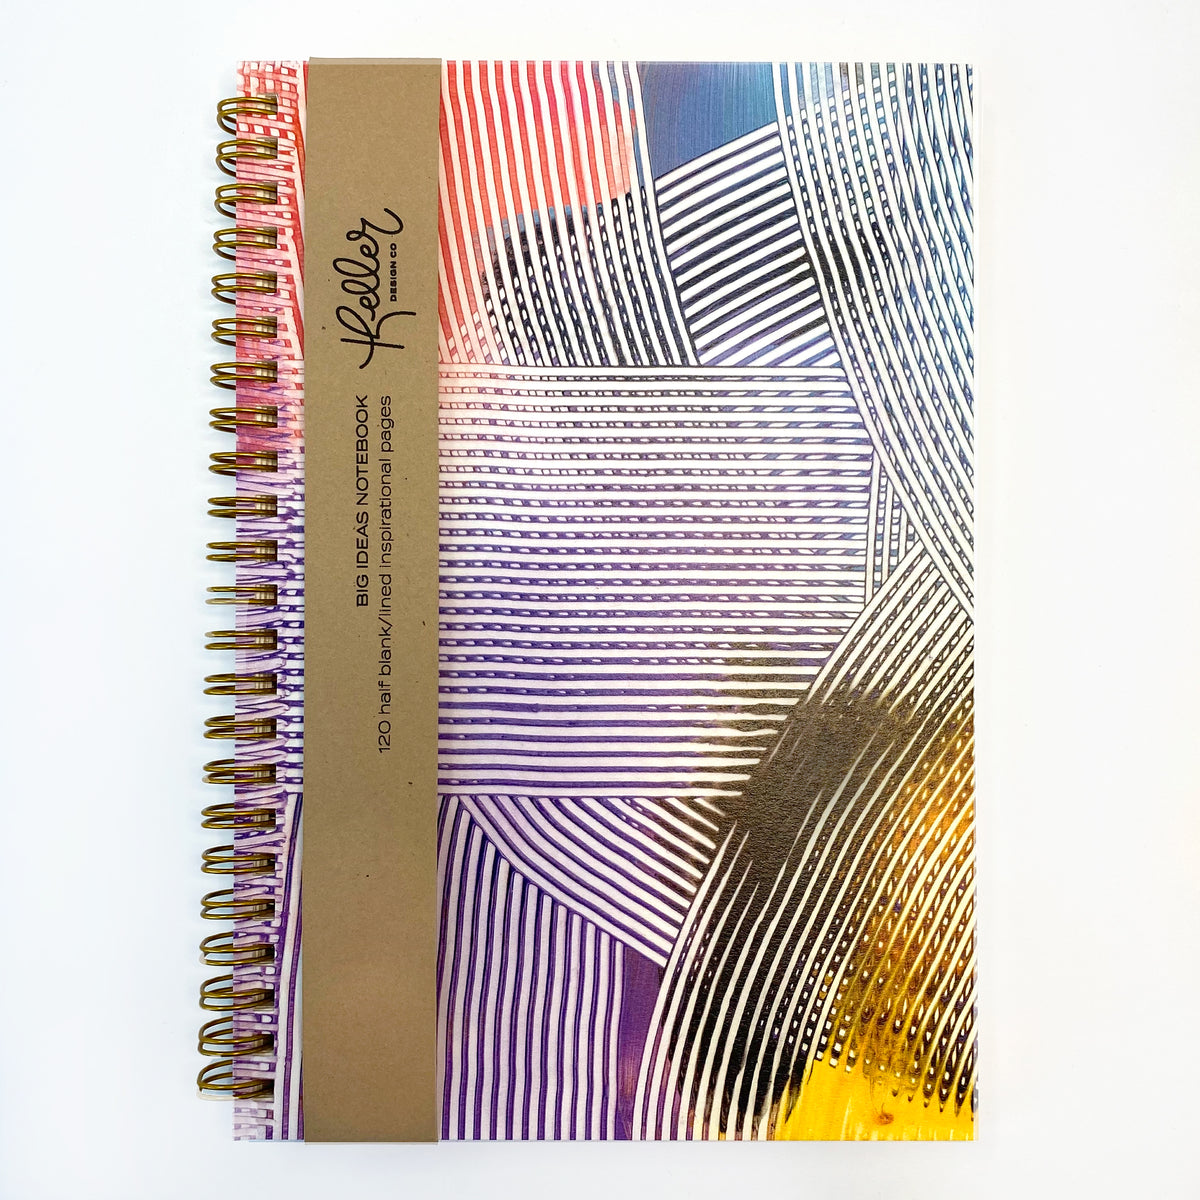 Curves Ahead:Faded Brights No.1-5.5”x8”- Big Ideas Spiral Bound Notebook